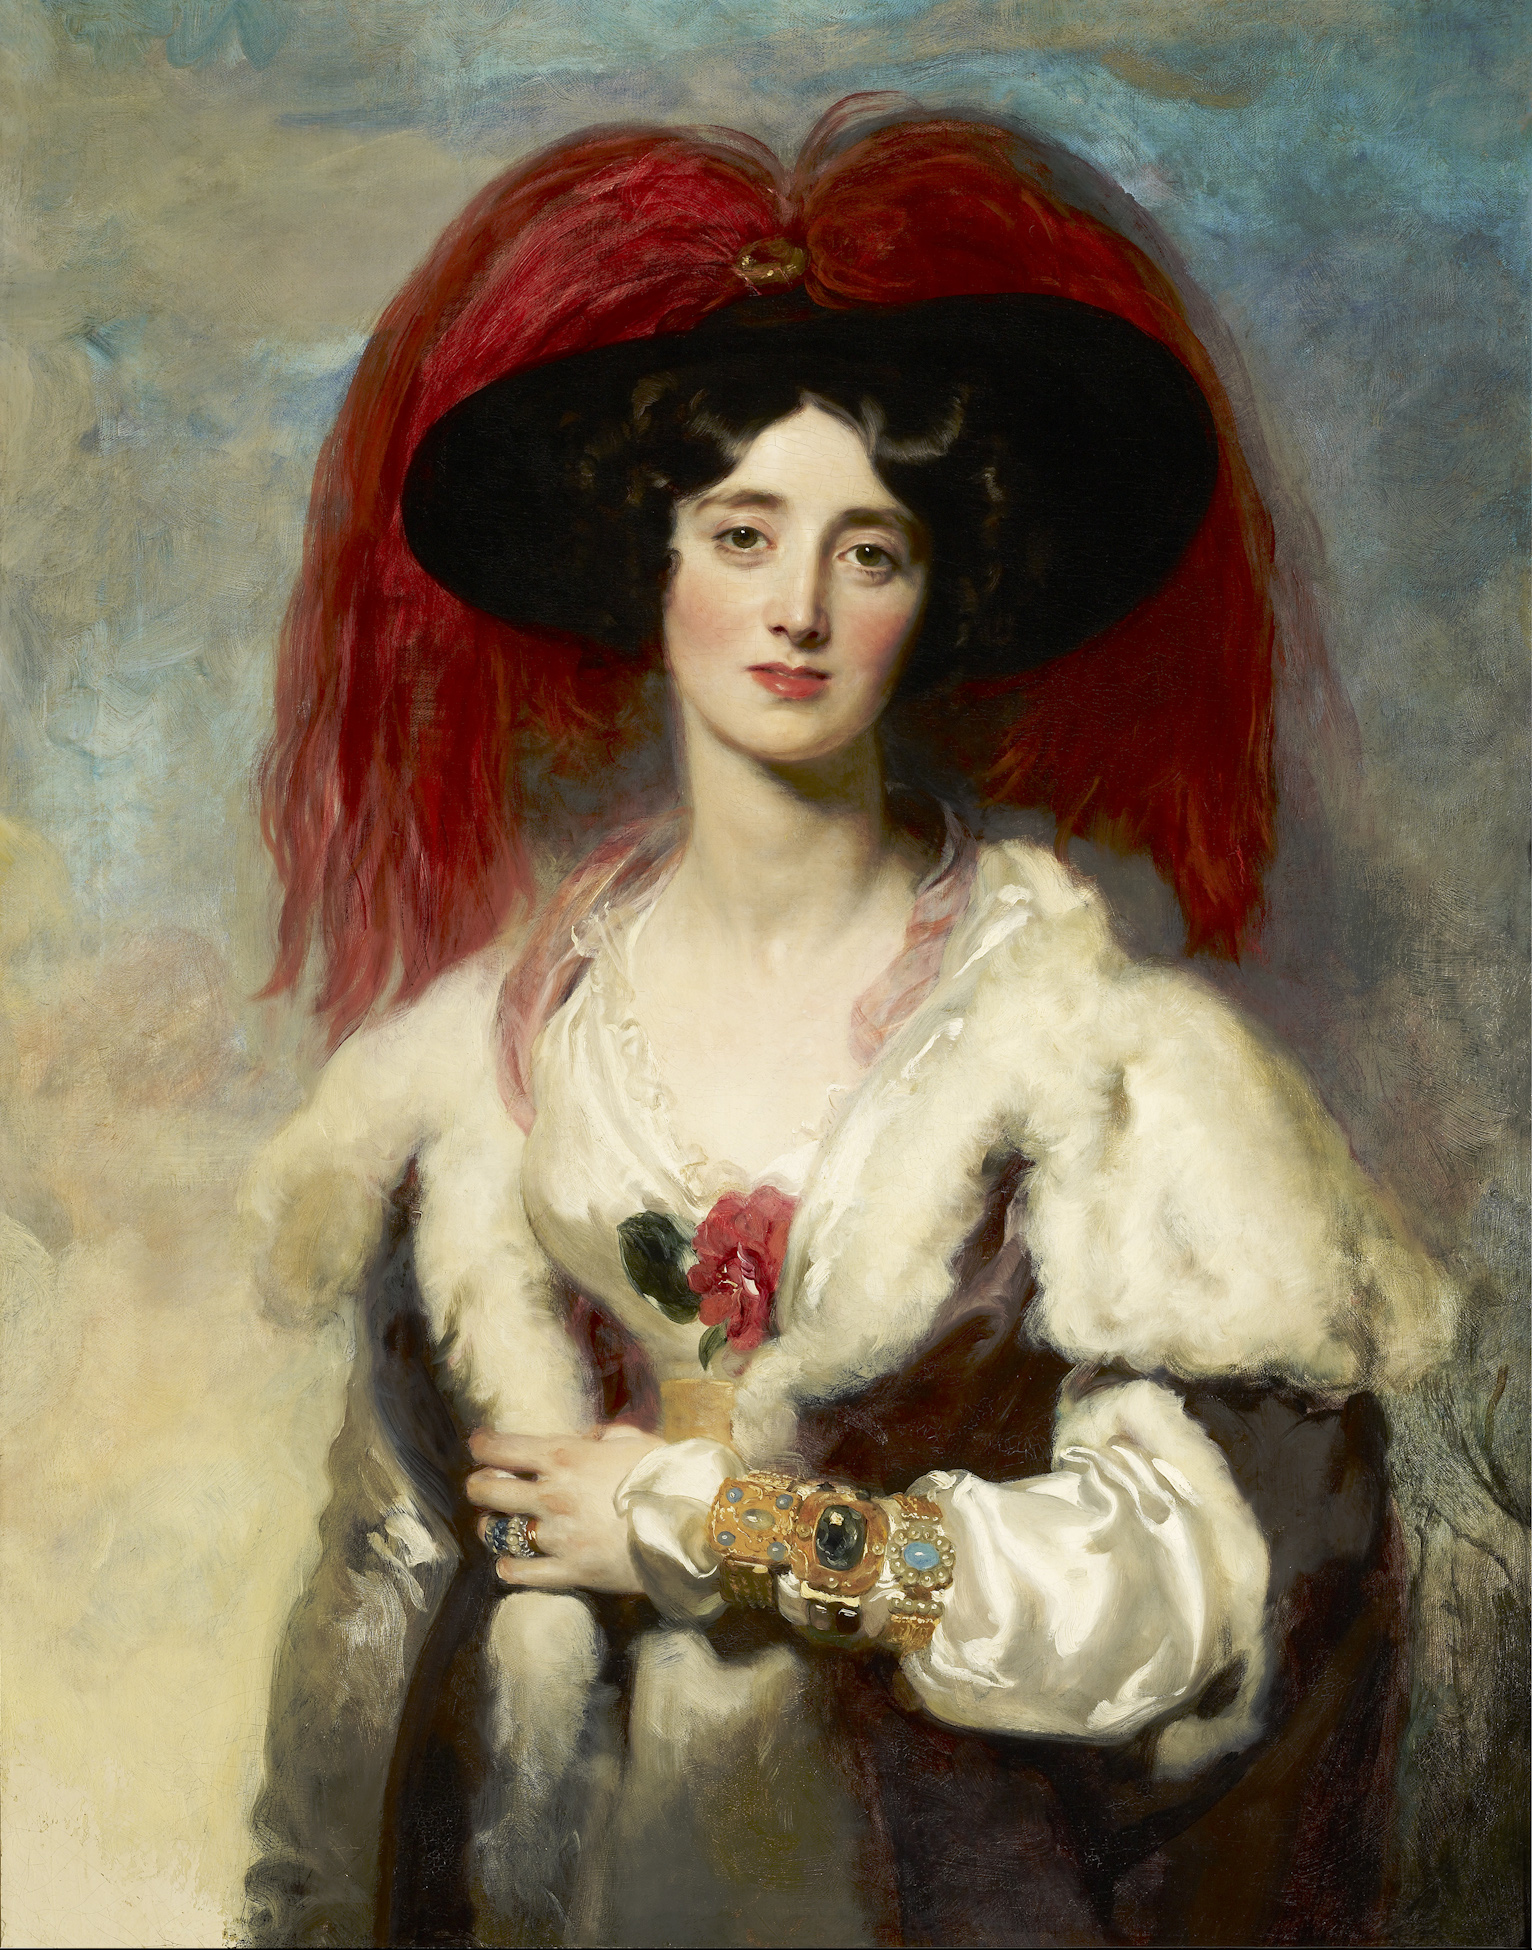 Julia, Lady Peel by Thomas Lawrence - 1827 - 90.8 x 70.8 cm The Frick Collection